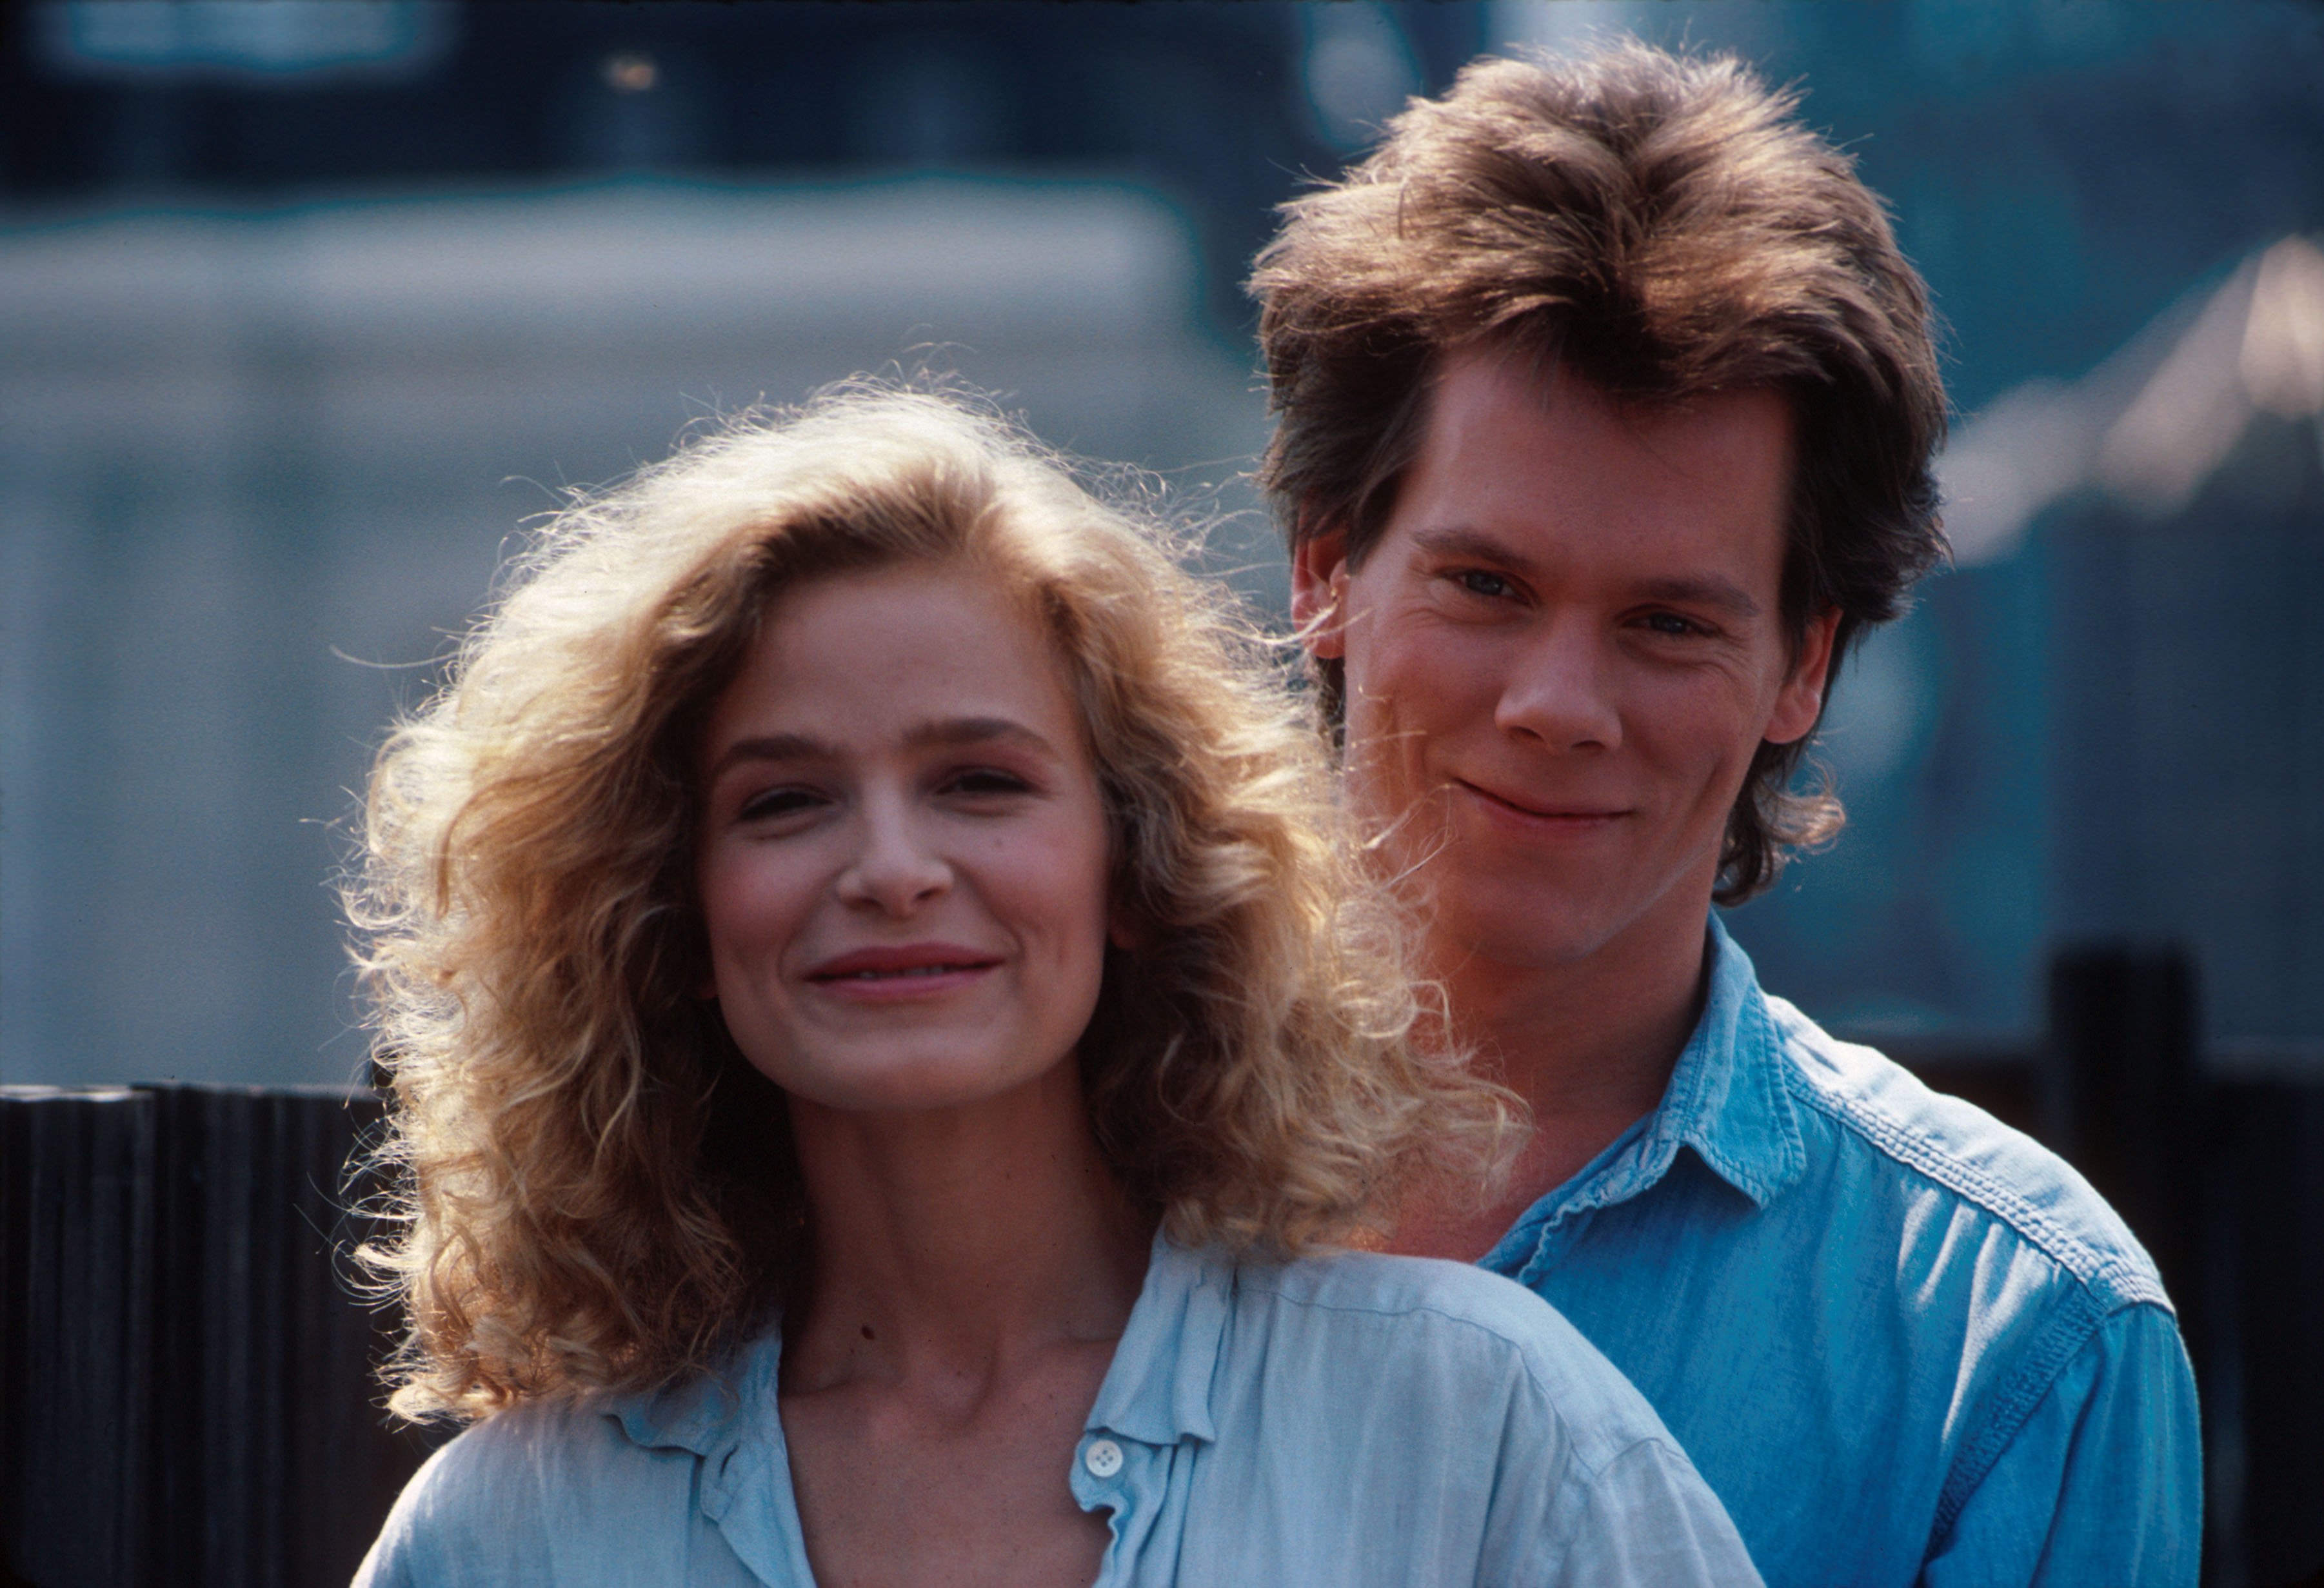 Kevin Bacon with Kyra Sedgwick on photo shoot in New York. August 1988 | Photo: GettyImages